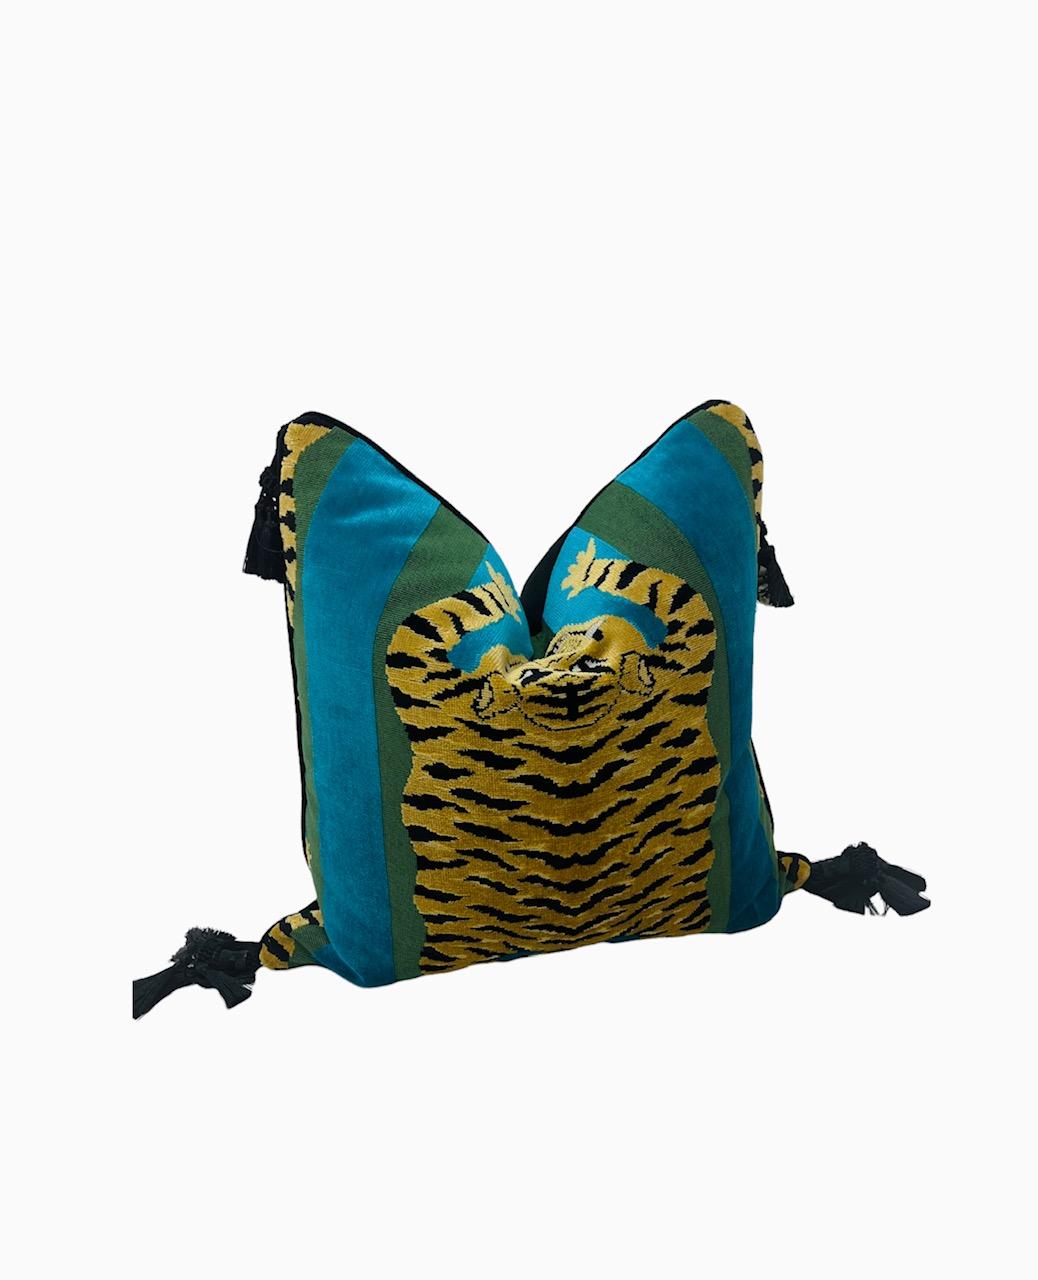 Jokhang Tiger Schumacher Fabric Pillow with Tassels In New Condition For Sale In Saint Louis, US